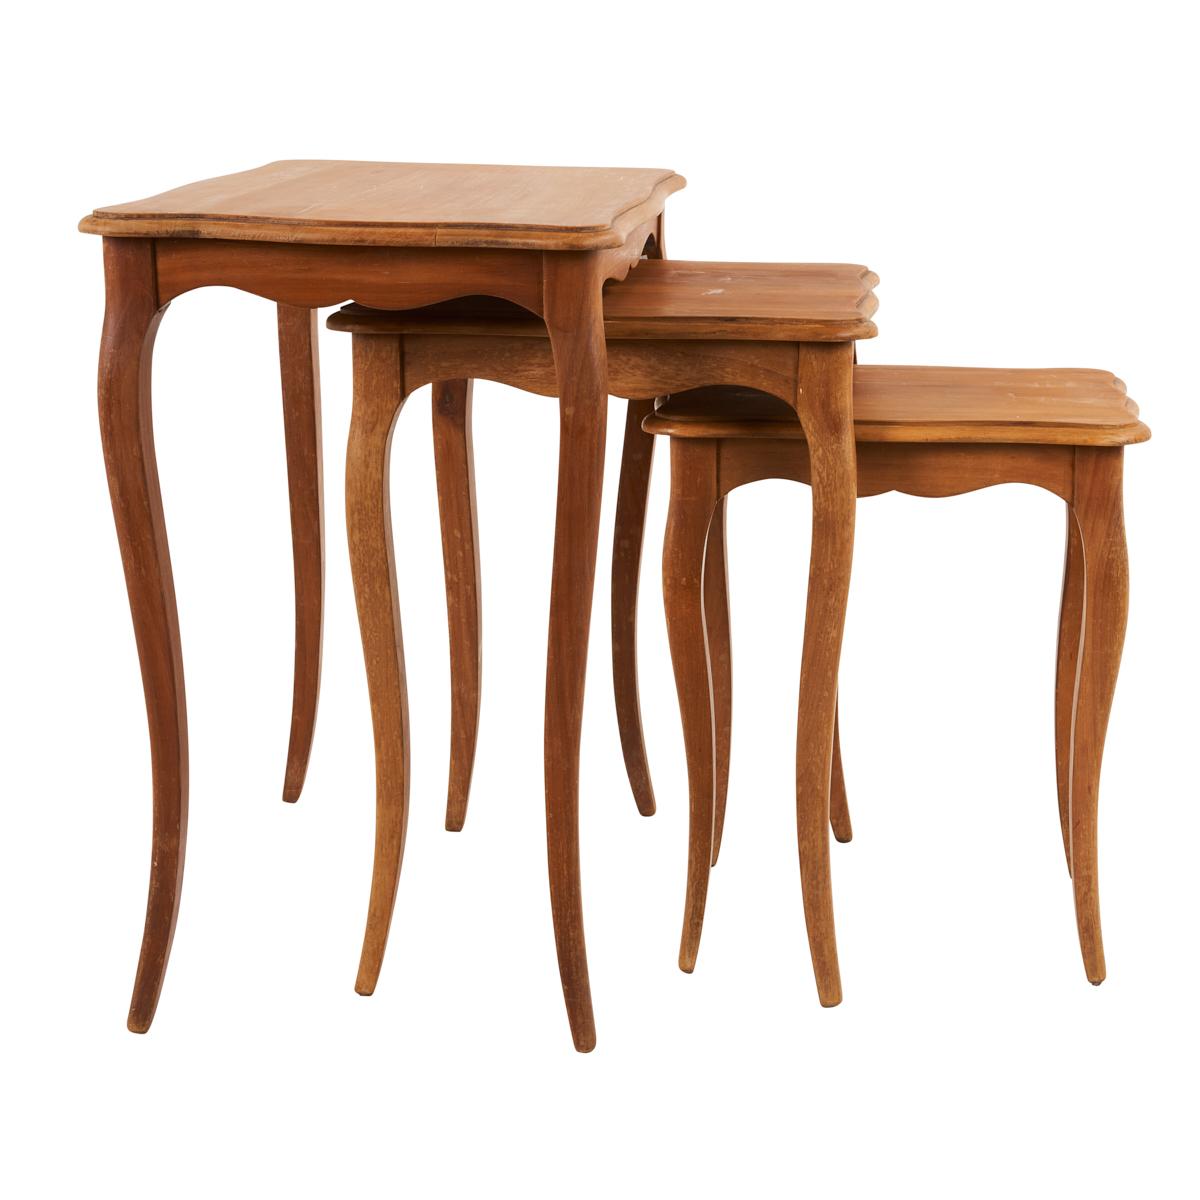 A wonderful vintage find from France, this trio of wood nesting tables is timeless, elegant and infinitely useful. Their soft silhouettes and delicate proportions make them extremely versatile and easy to place.
  